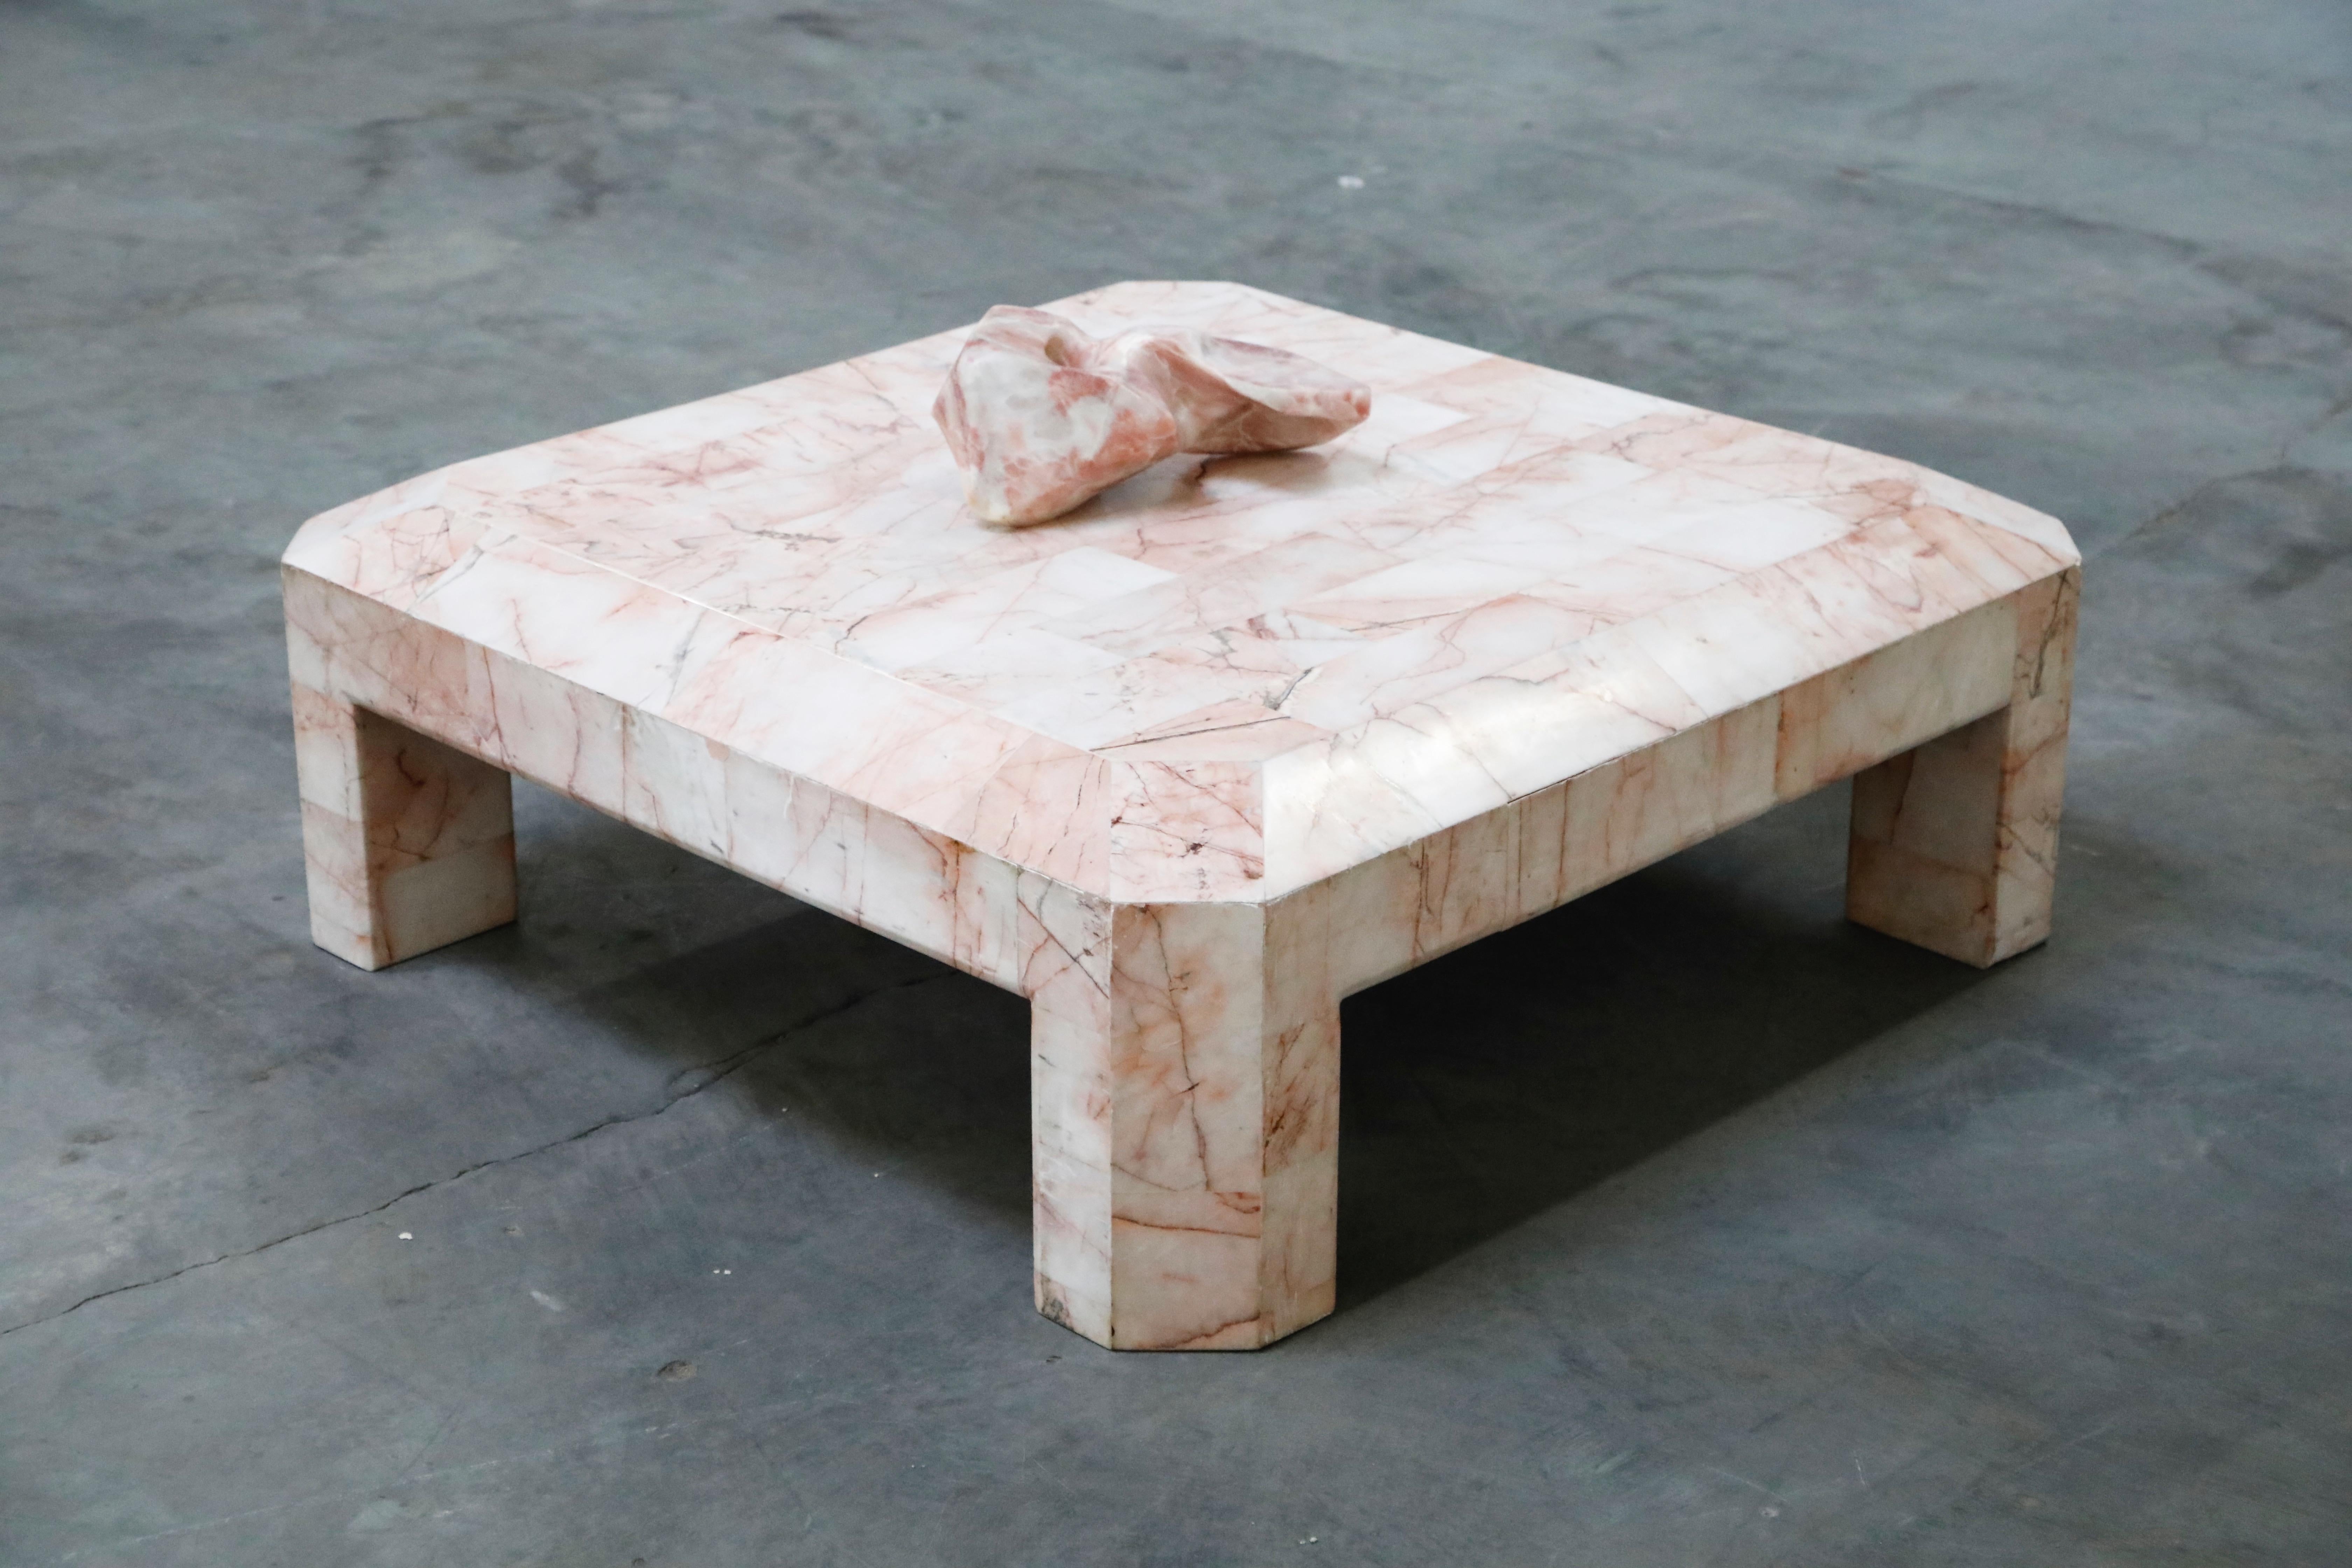 Italian Tessellated Pink Onyx Coffee Table with Matching Pink Onyx Sculpture, circa 1975